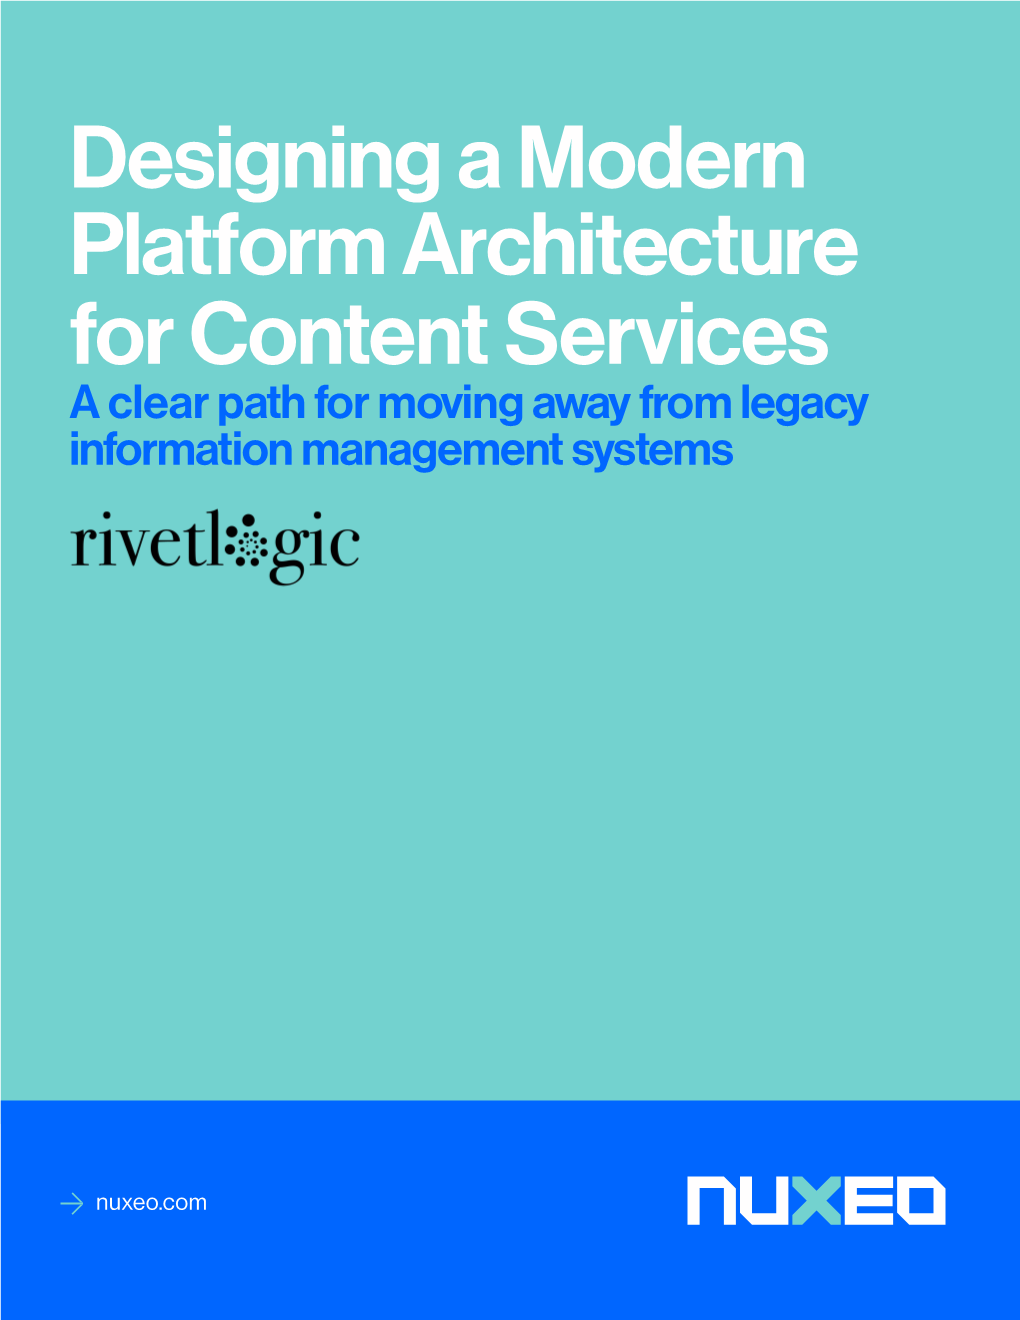 Designing a Modern Platform Architecture for Content Services a Clear Path for Moving Away from Legacy Information Management Systems